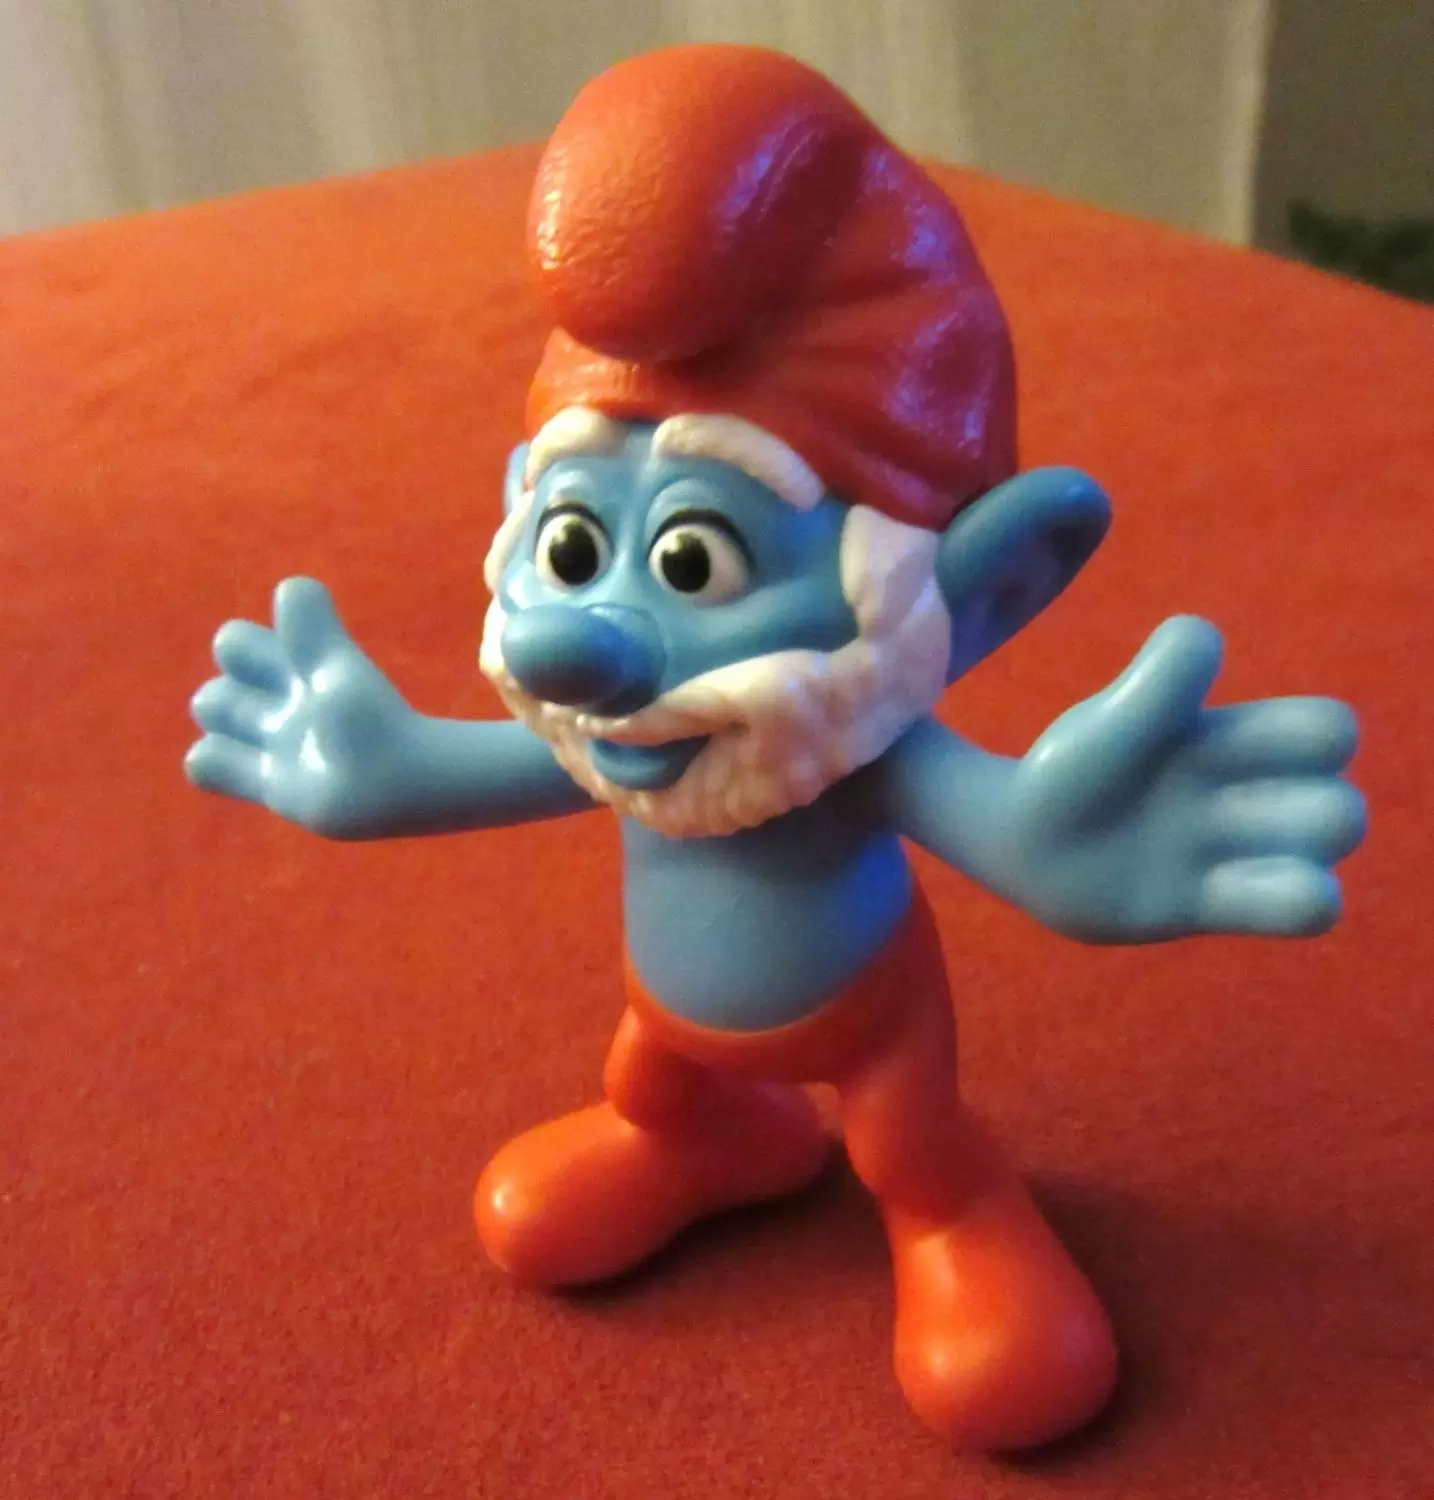 Papa Smurf #1 2013 The Smurfs 2 McDonalds Happy Meal Toy 